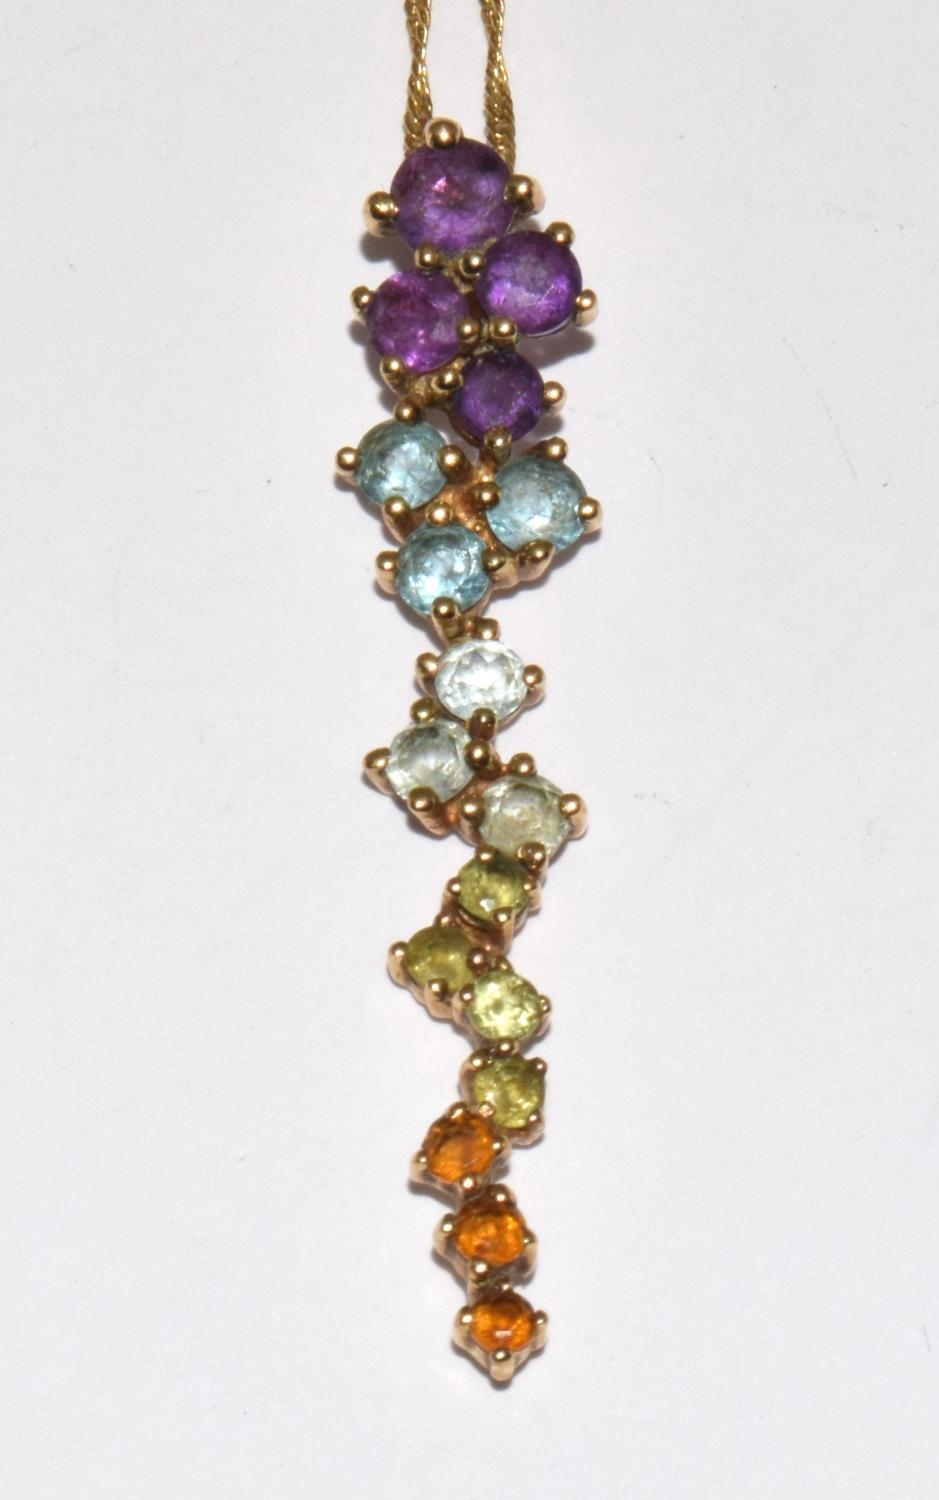 9ct gold Multi jem stone pendant necklace of Peridot, Topaz, Amethyst, and Citrine chain 46cm - Image 2 of 6